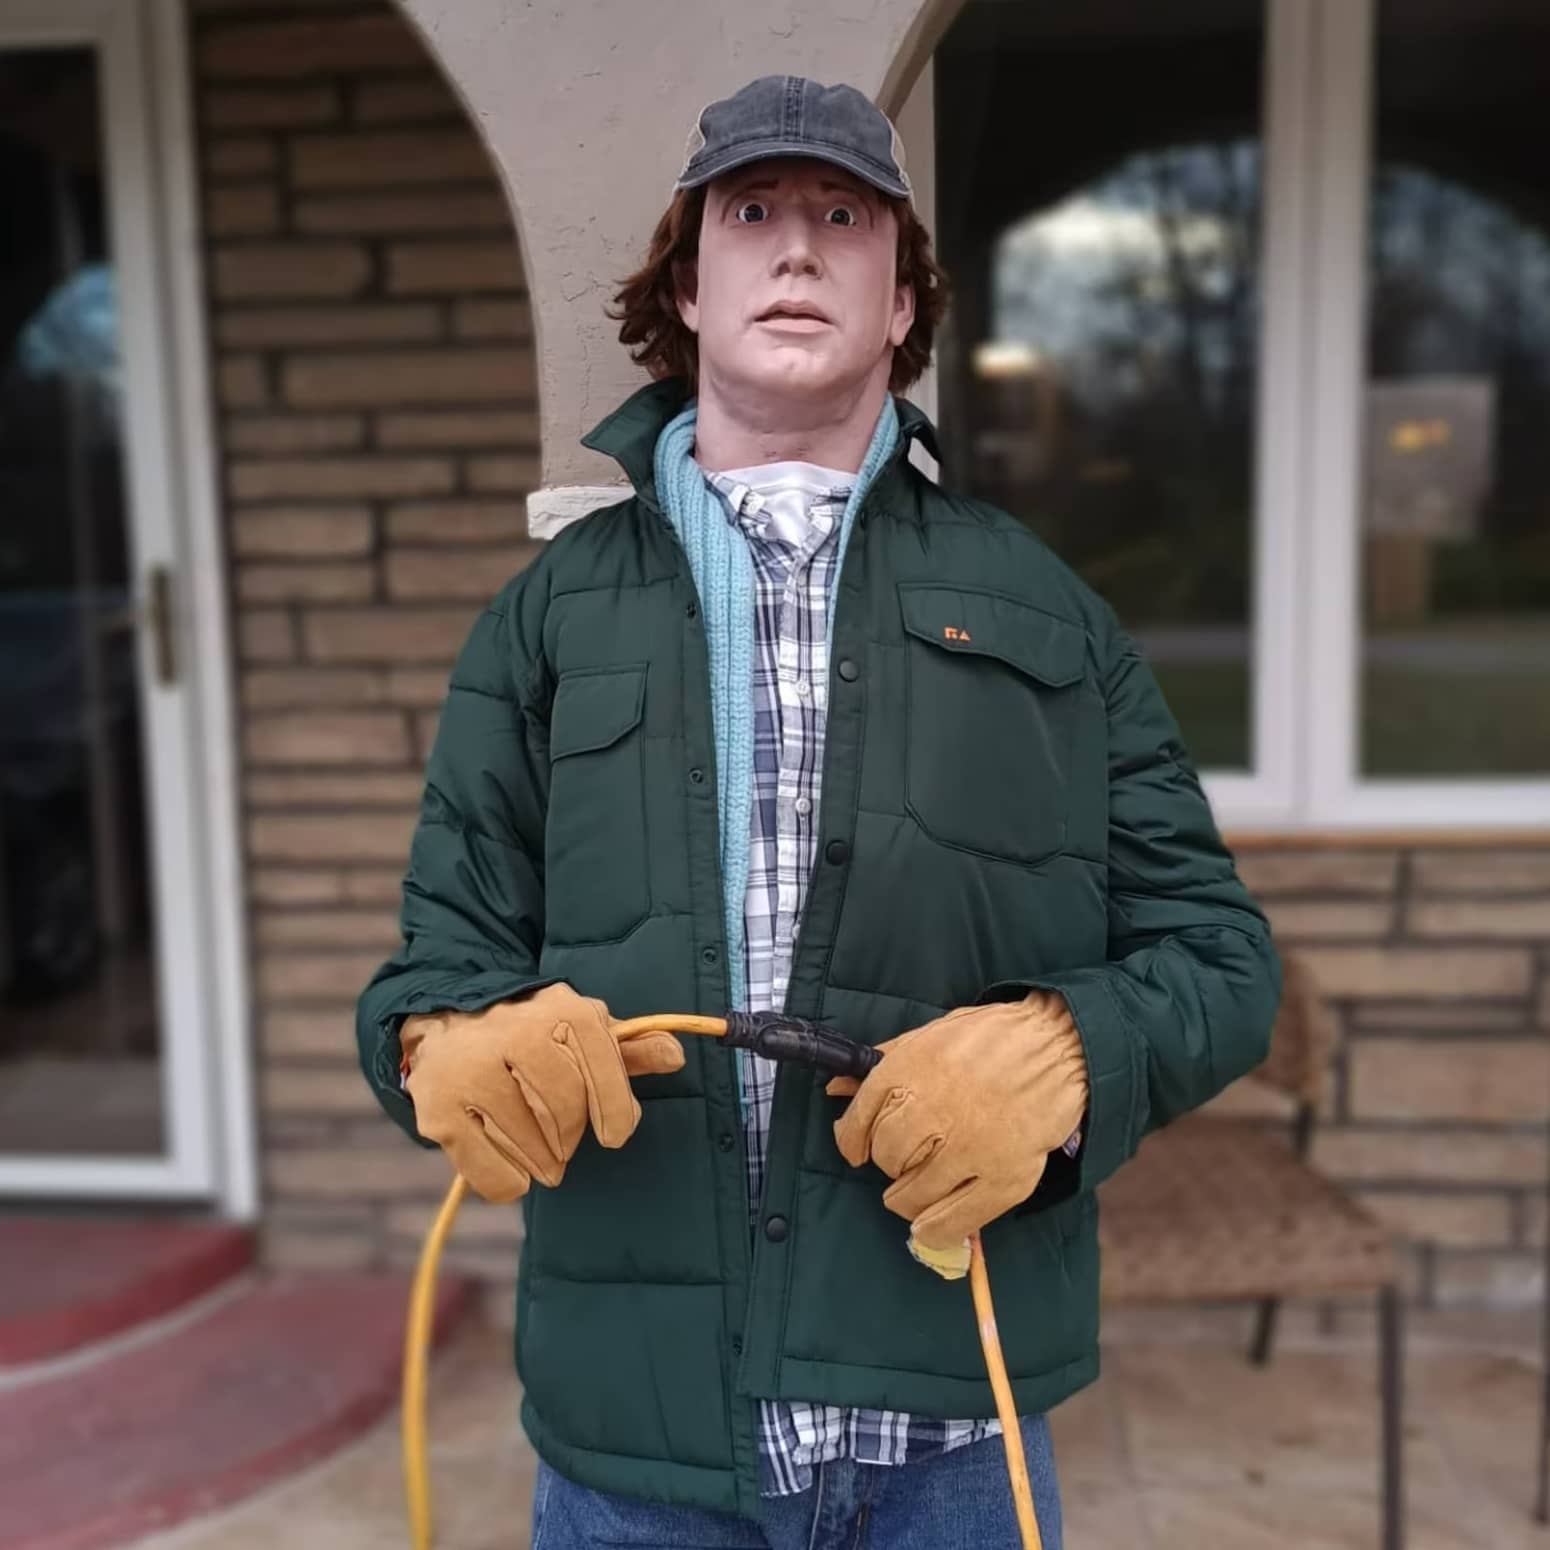 Life-Sized Christmas Vacation Clark Griswold Statue